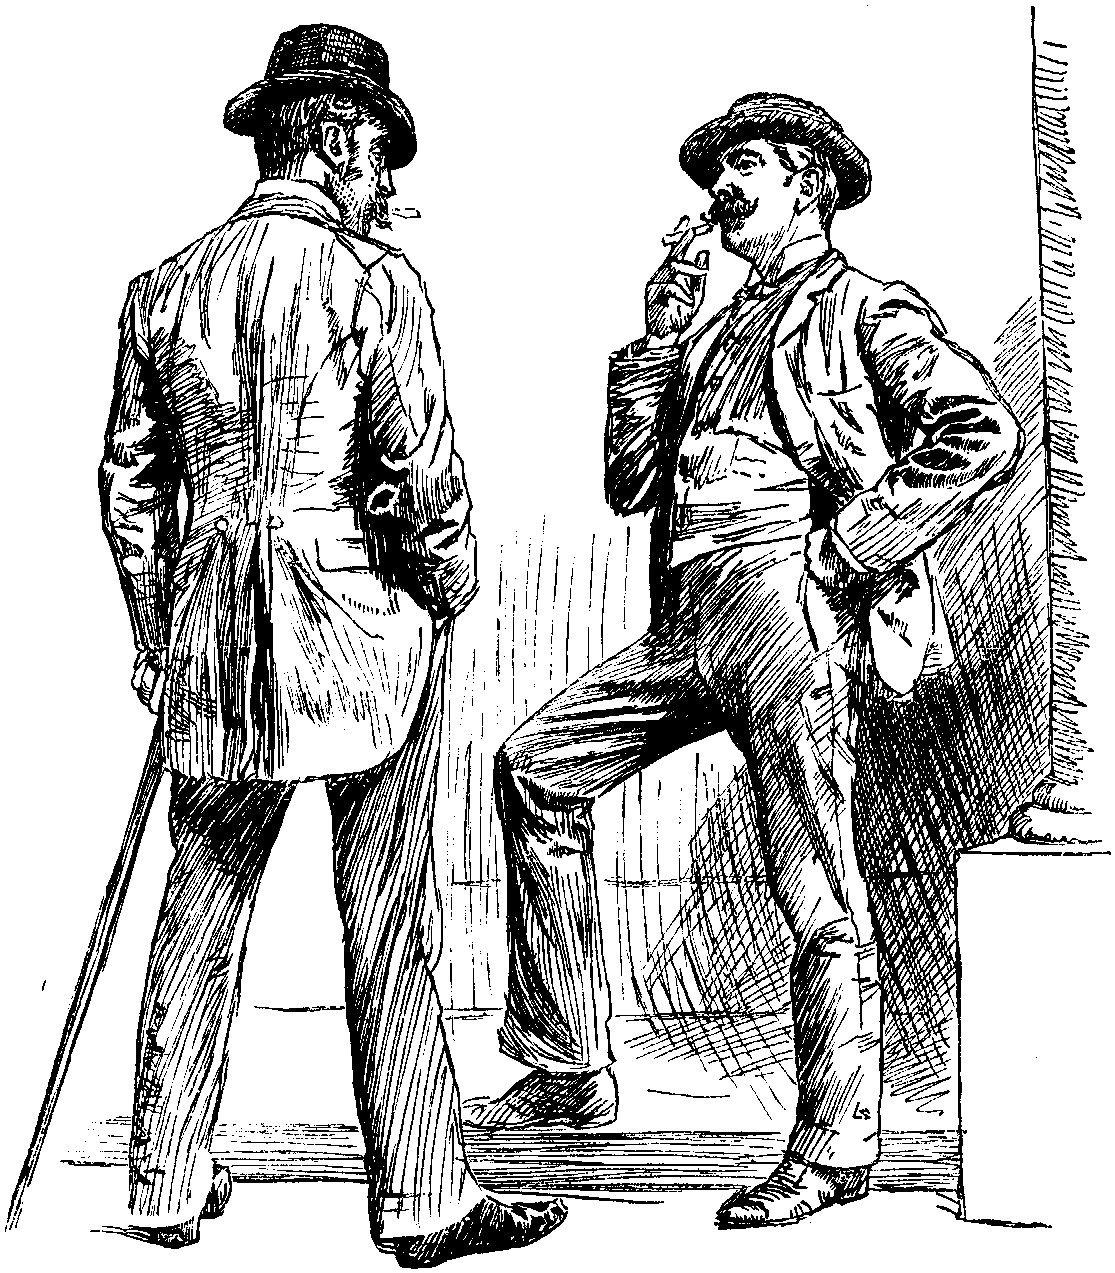 Punch, December 5, 1891. picture